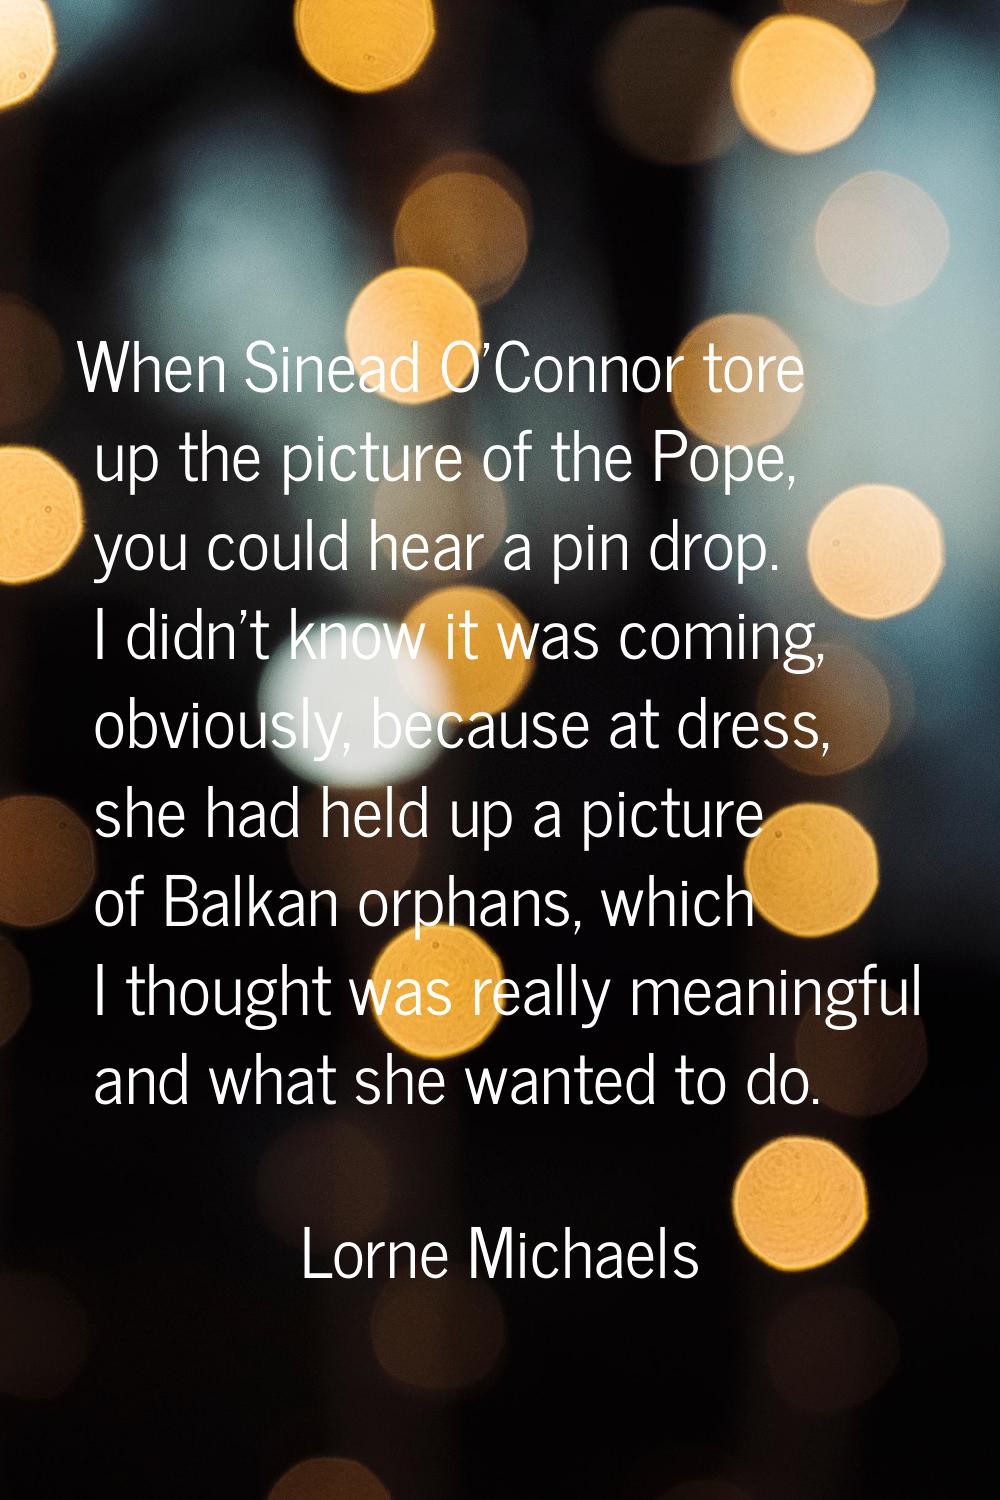 When Sinead O'Connor tore up the picture of the Pope, you could hear a pin drop. I didn't know it w